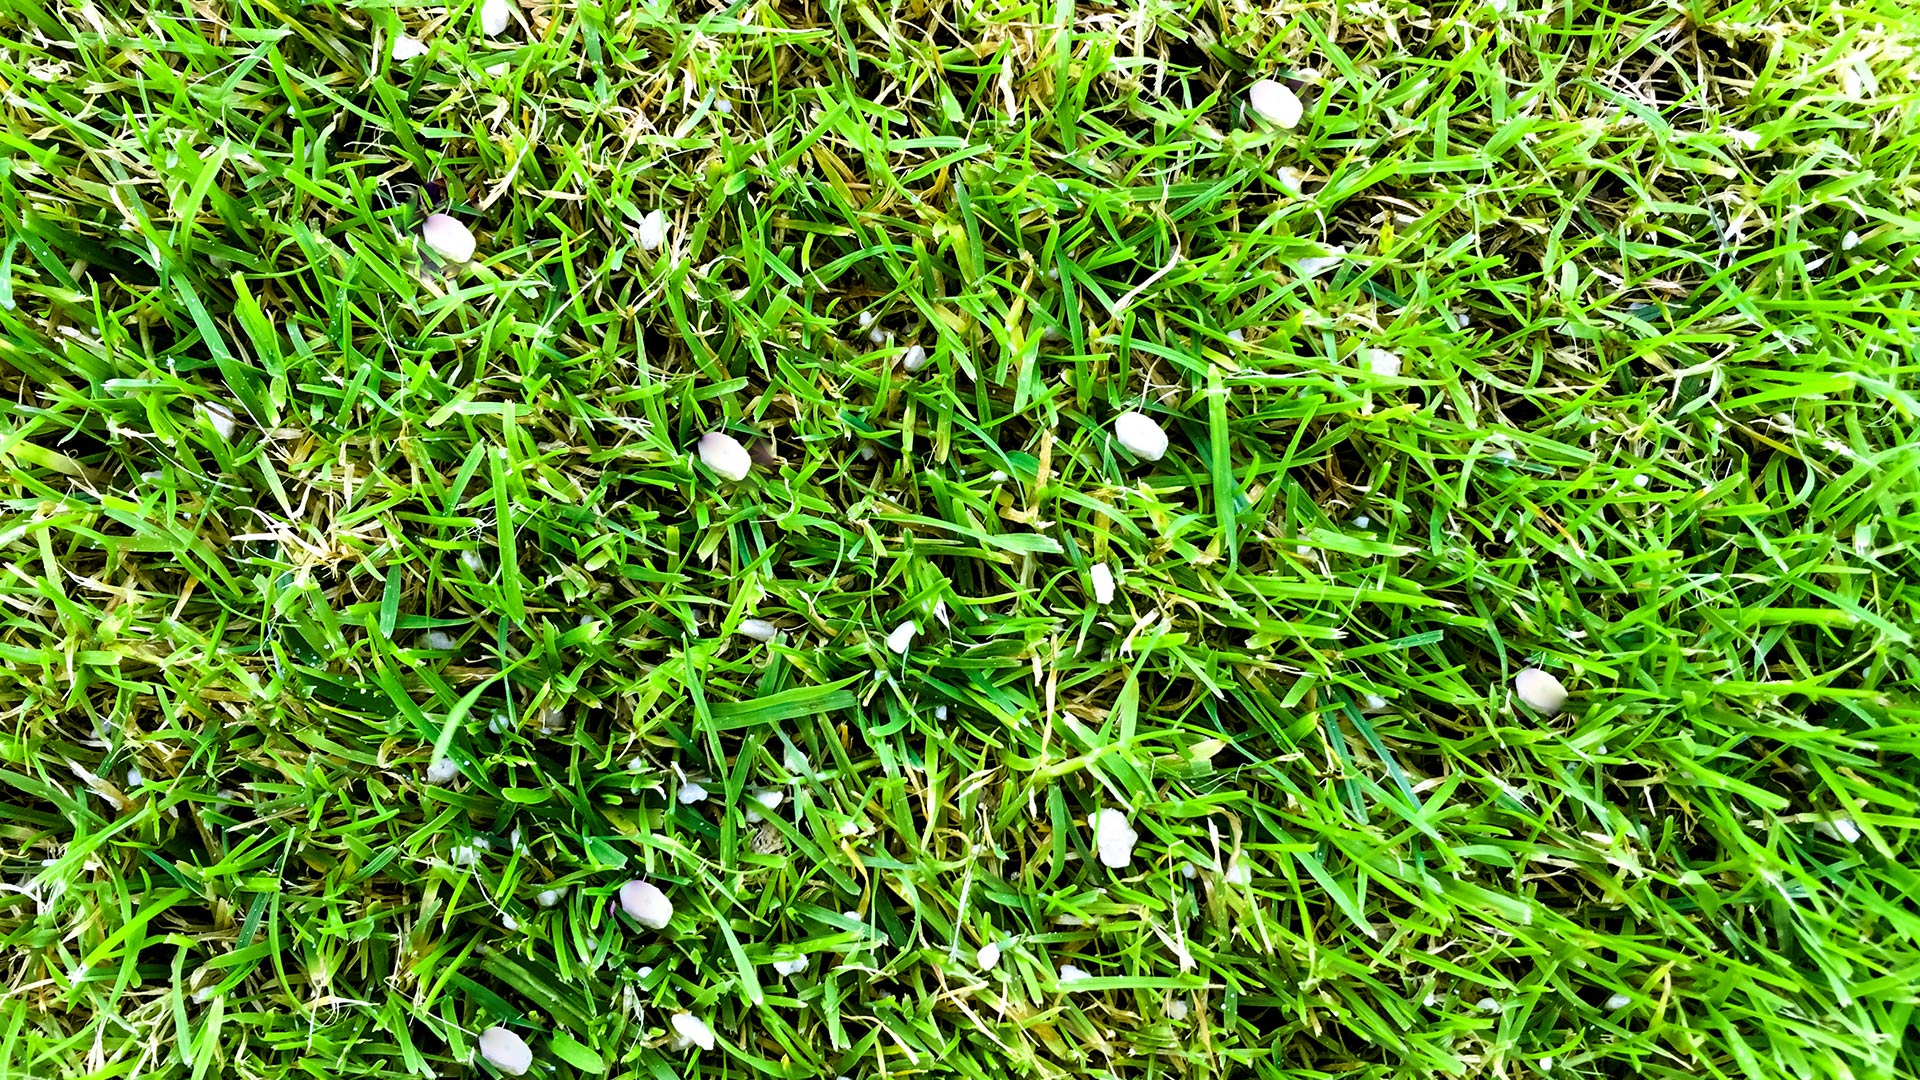 3 Mistakes You Could Make if You Try to Fertilize Your Lawn Yourself